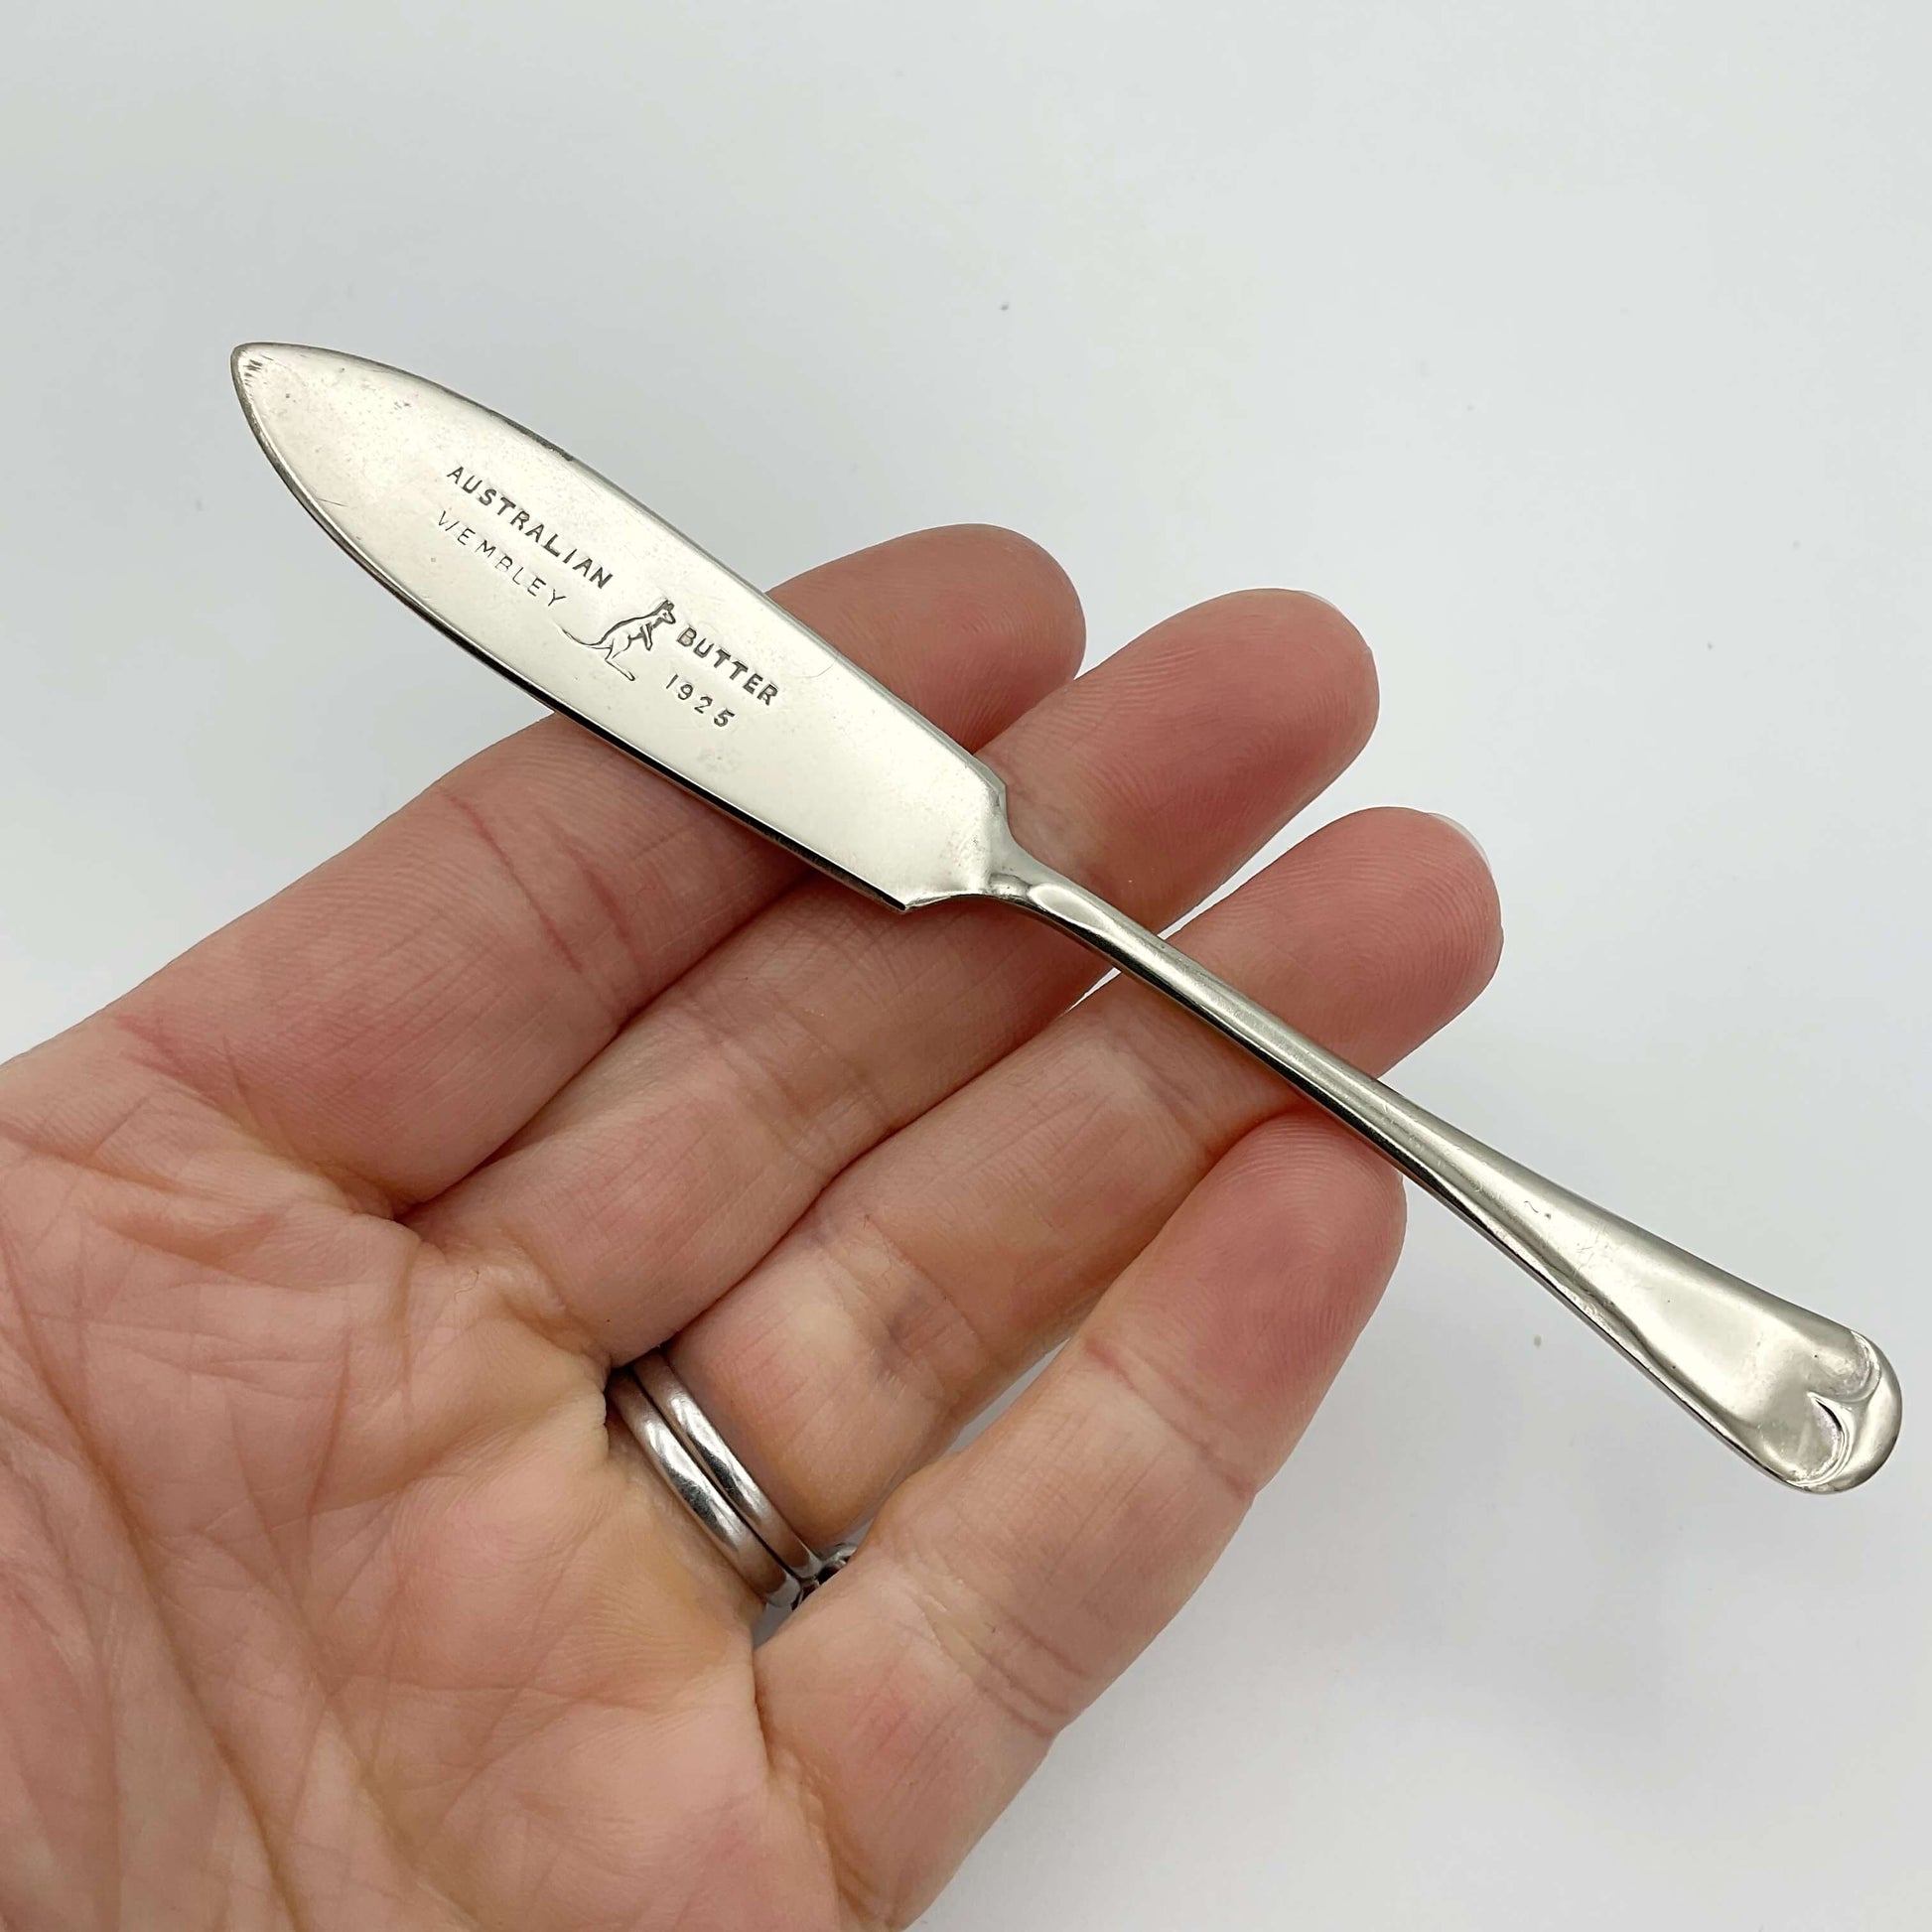 Silver plated butter knife with Australian Butter Wembley 1925 on the blade with a Kangaroo emblem held on a hand